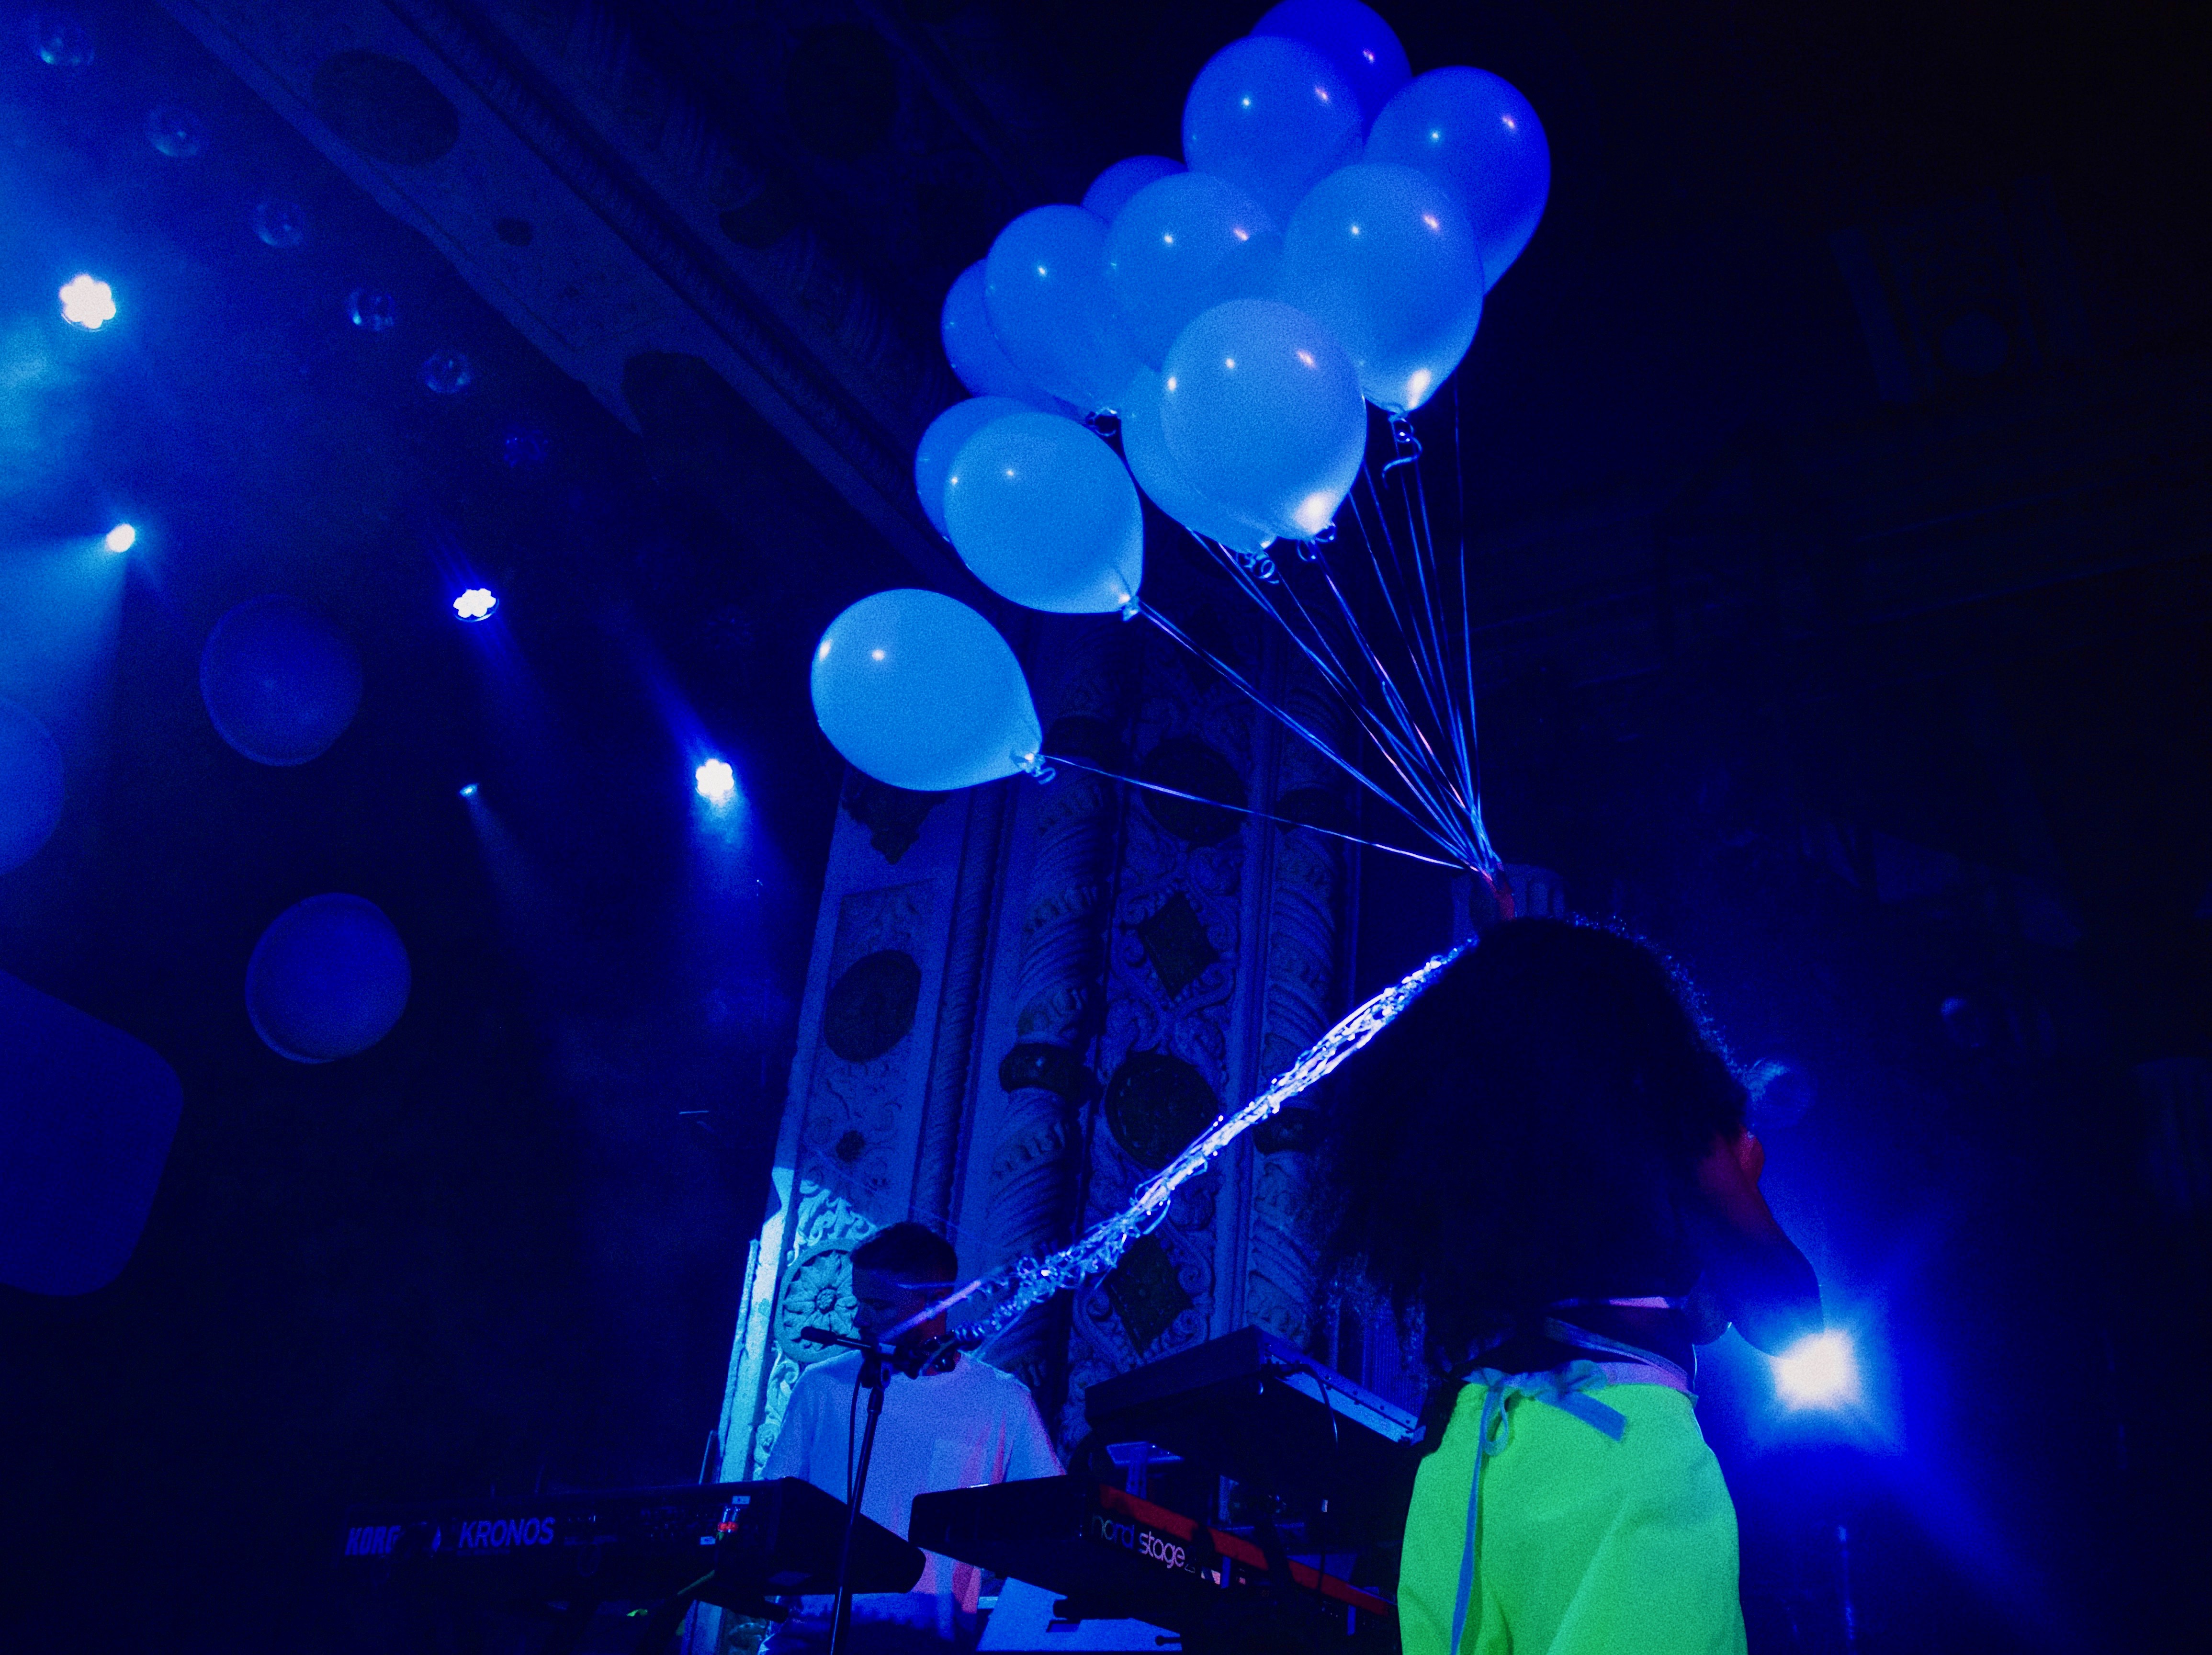 NAO with white balloons